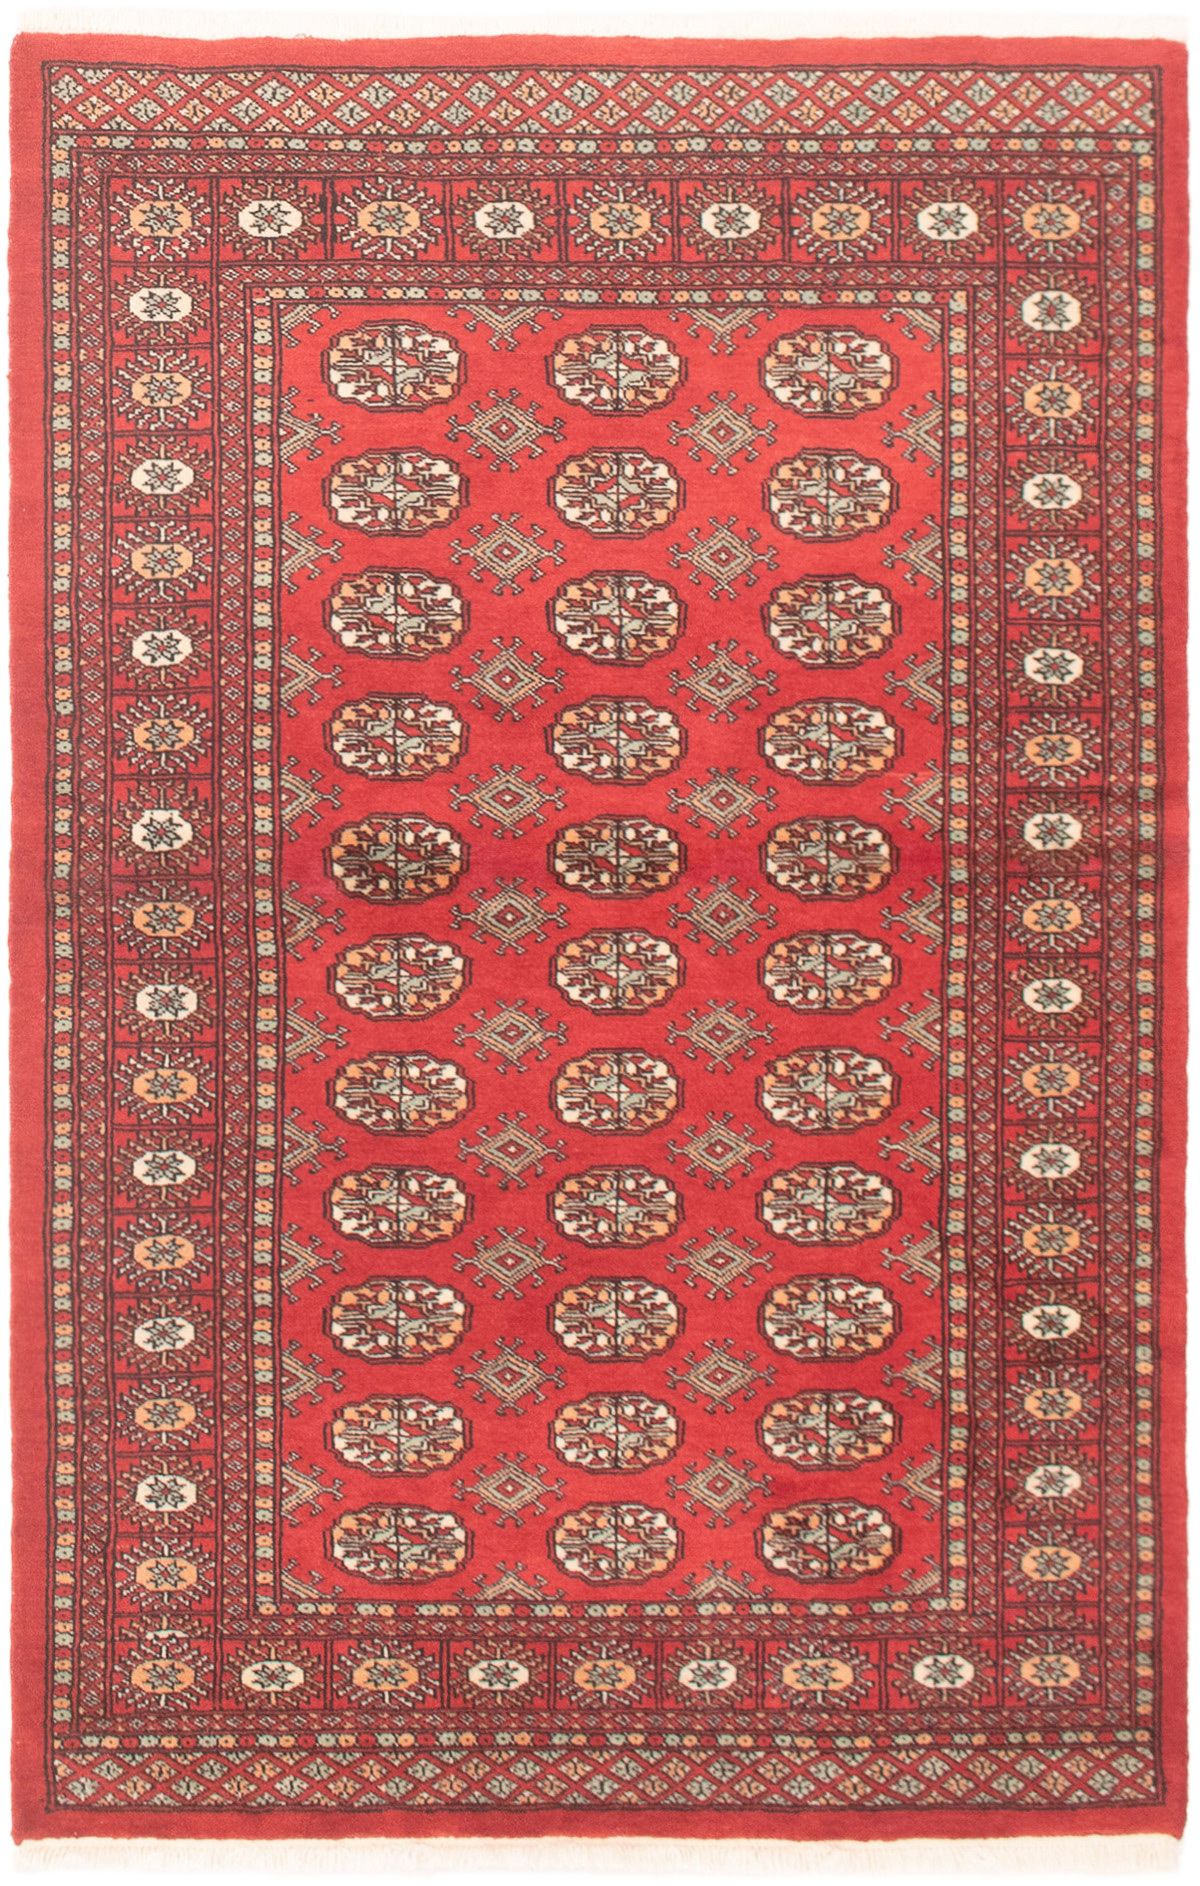 Hand-knotted Finest Peshawar Bokhara Red Wool Rug 6'1" x 4'0" Size: 4'0" x 6'1"  